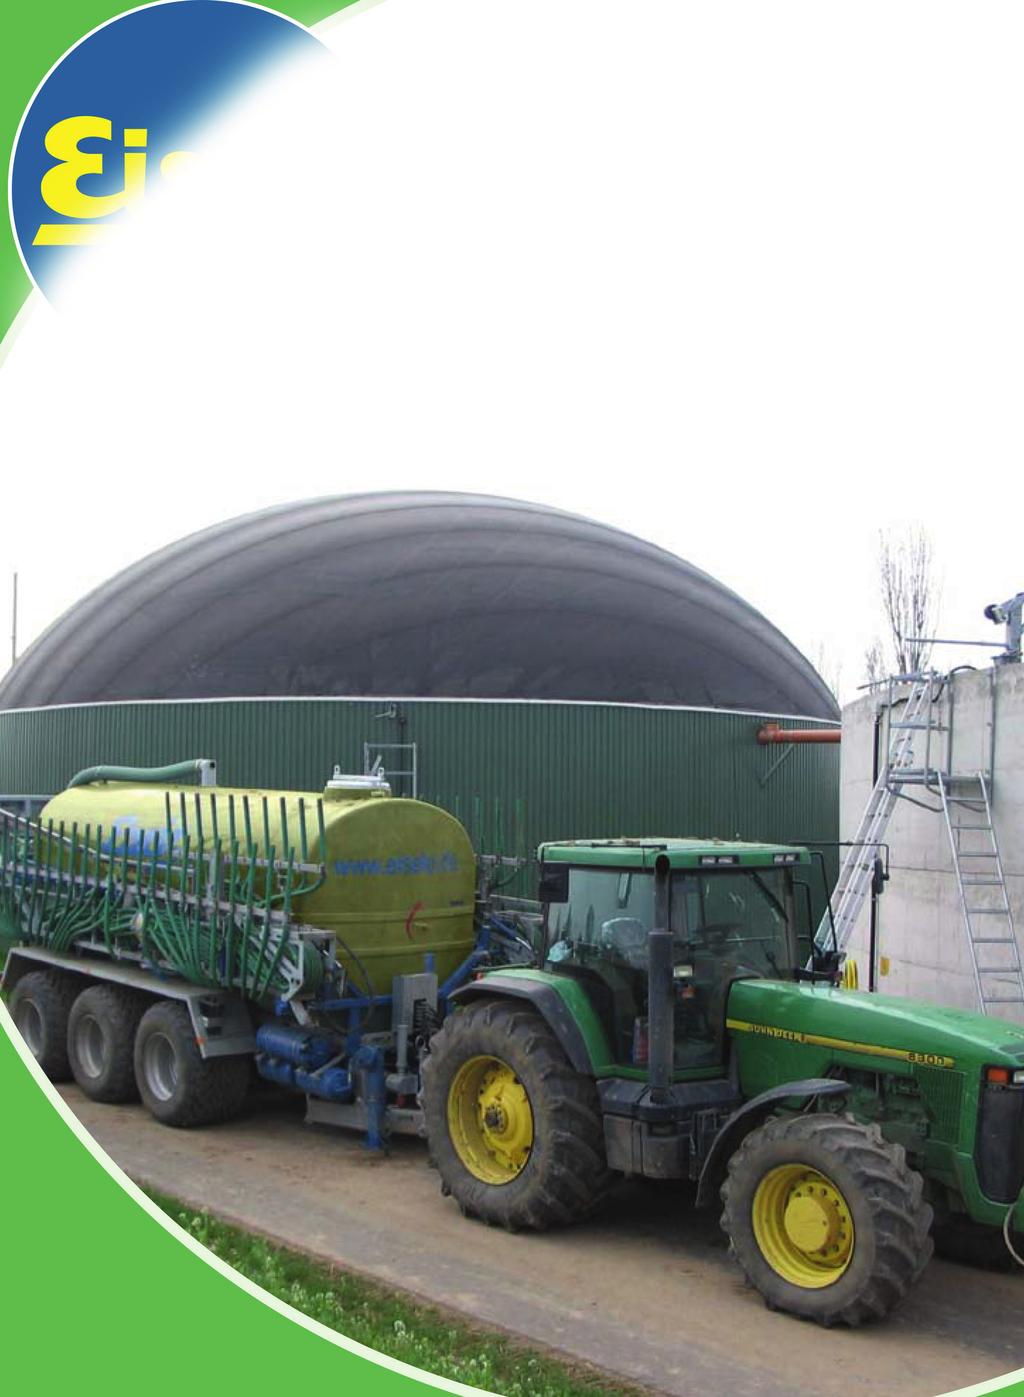 Components for biogas